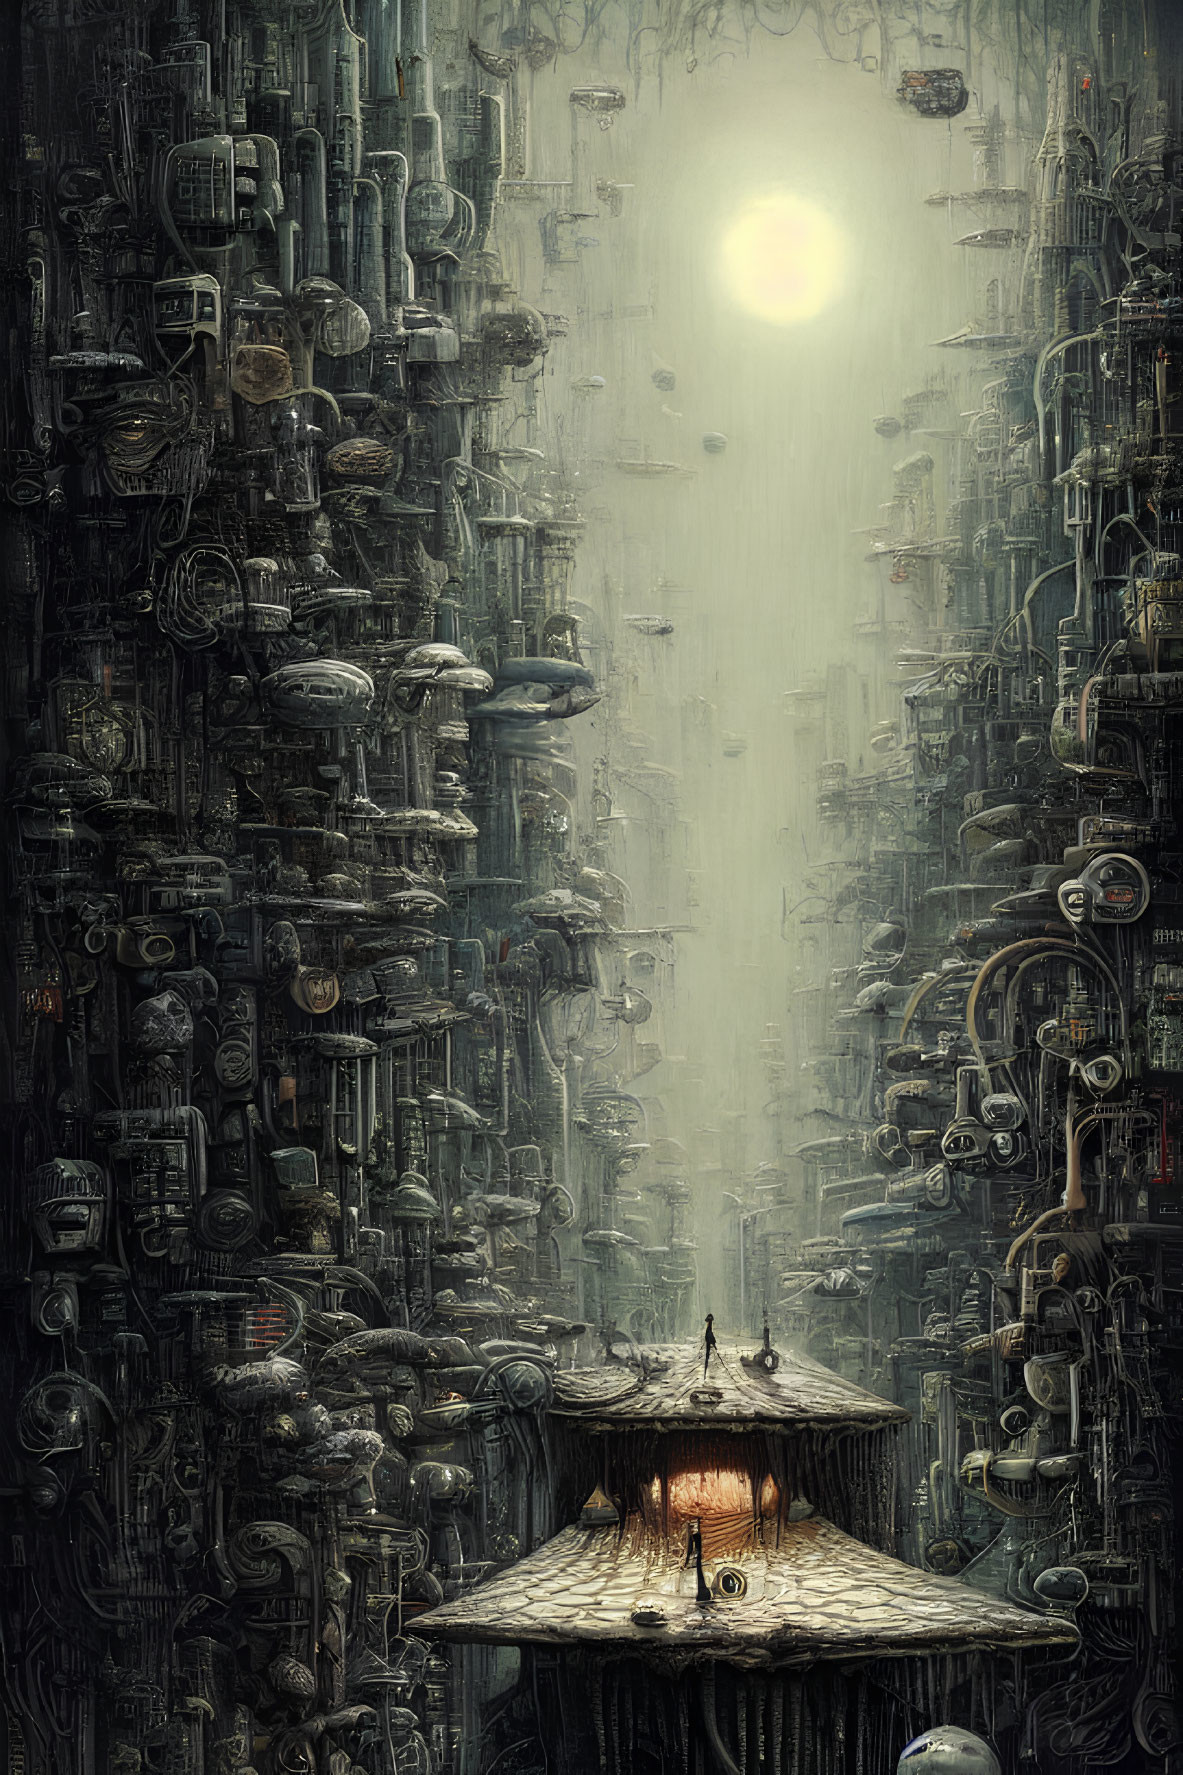 Dystopian cityscape with dense mechanical structures and solitary platform